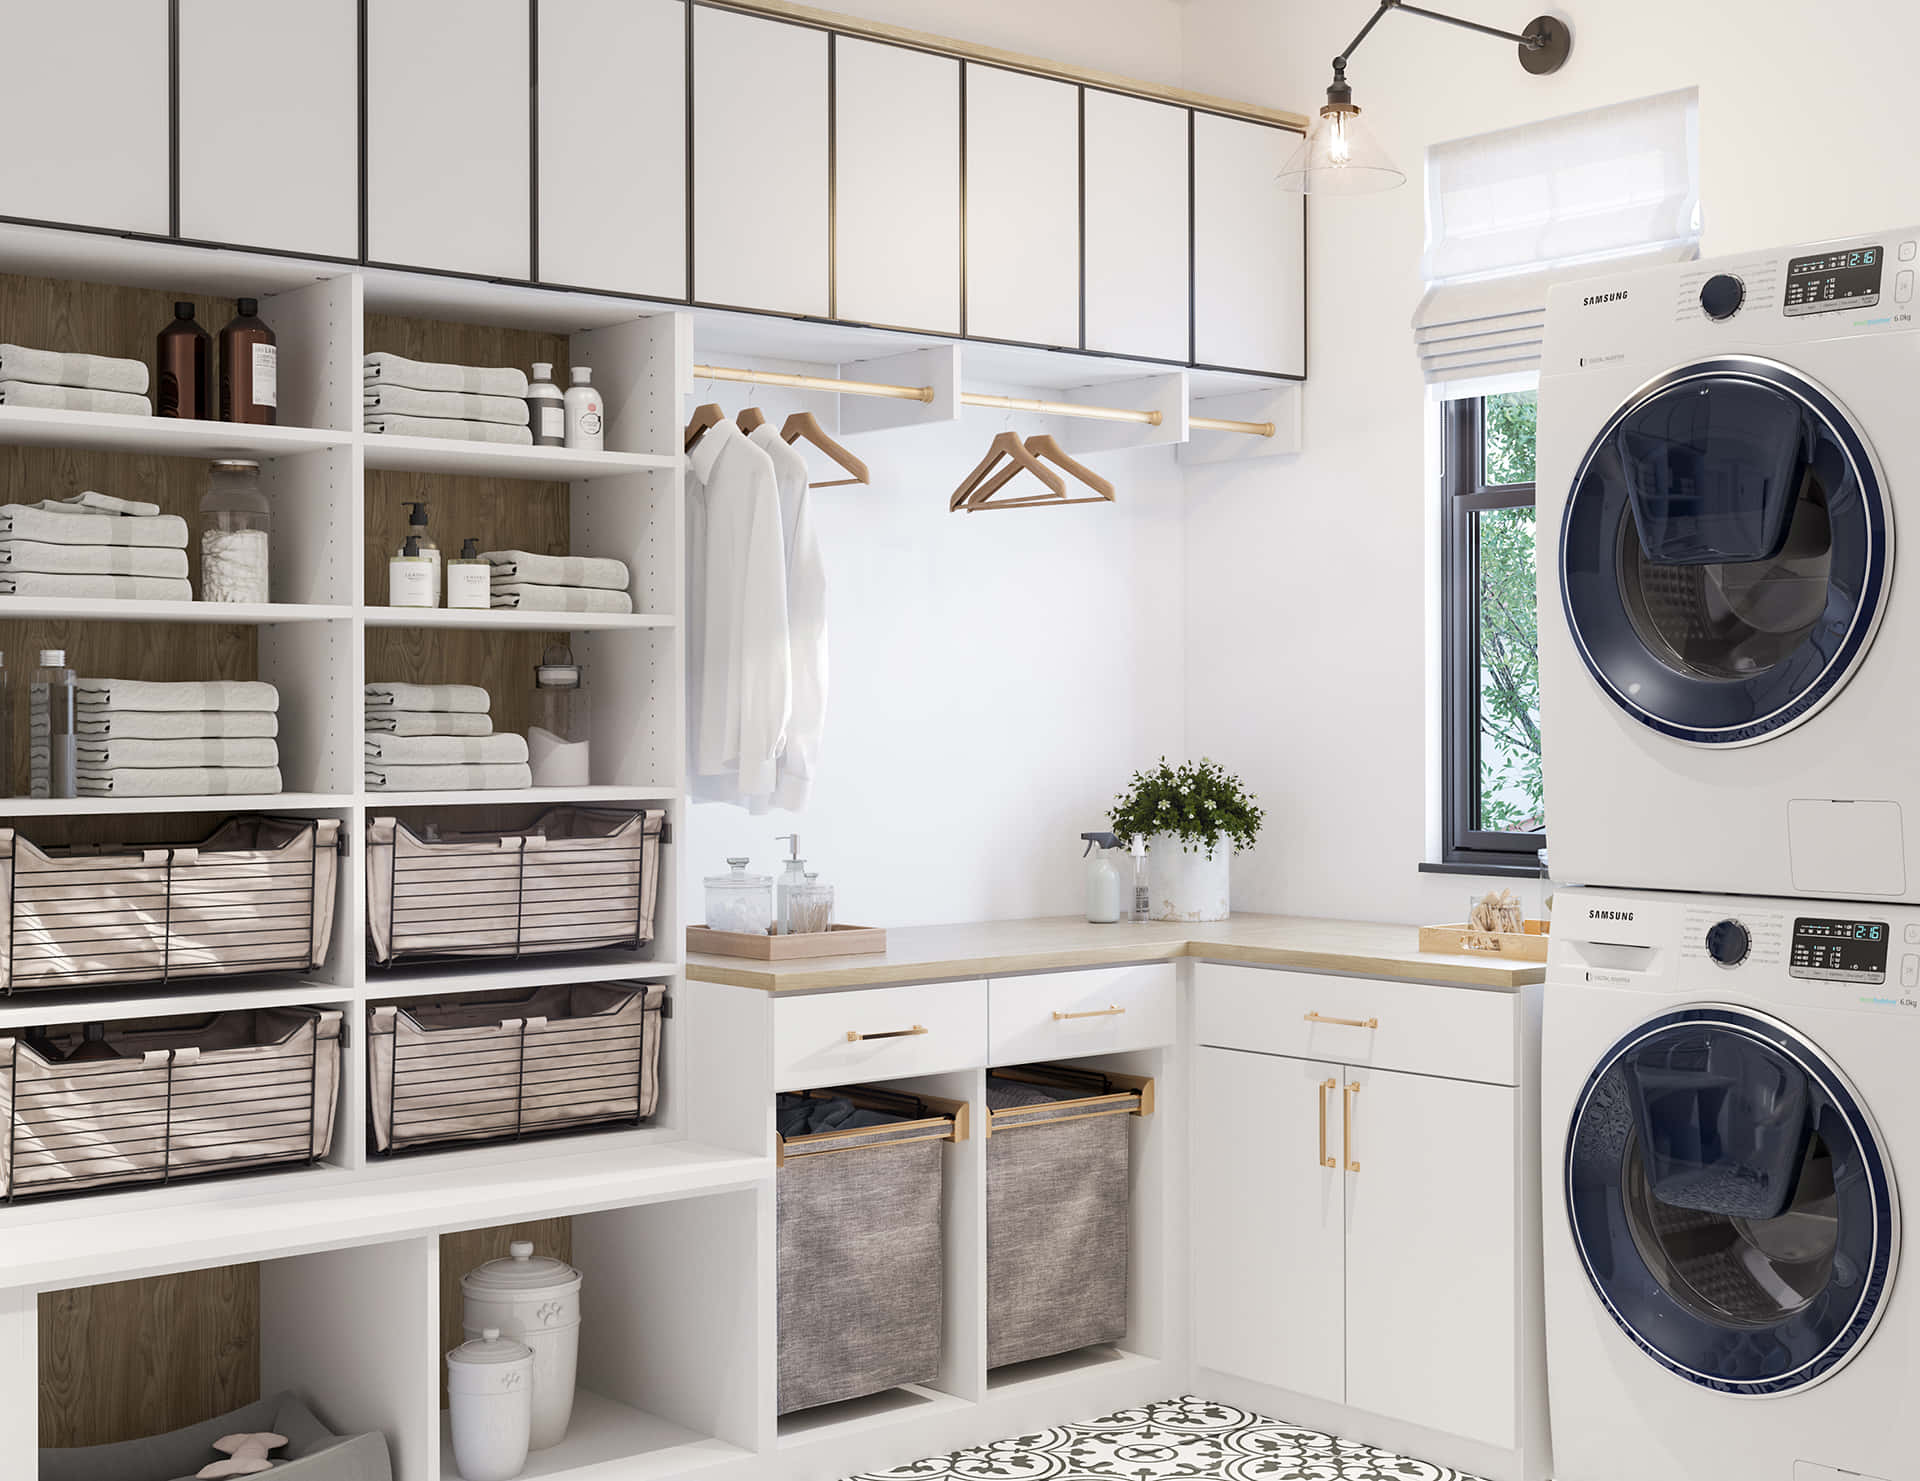 A Laundry Room With A Washer And Dryer